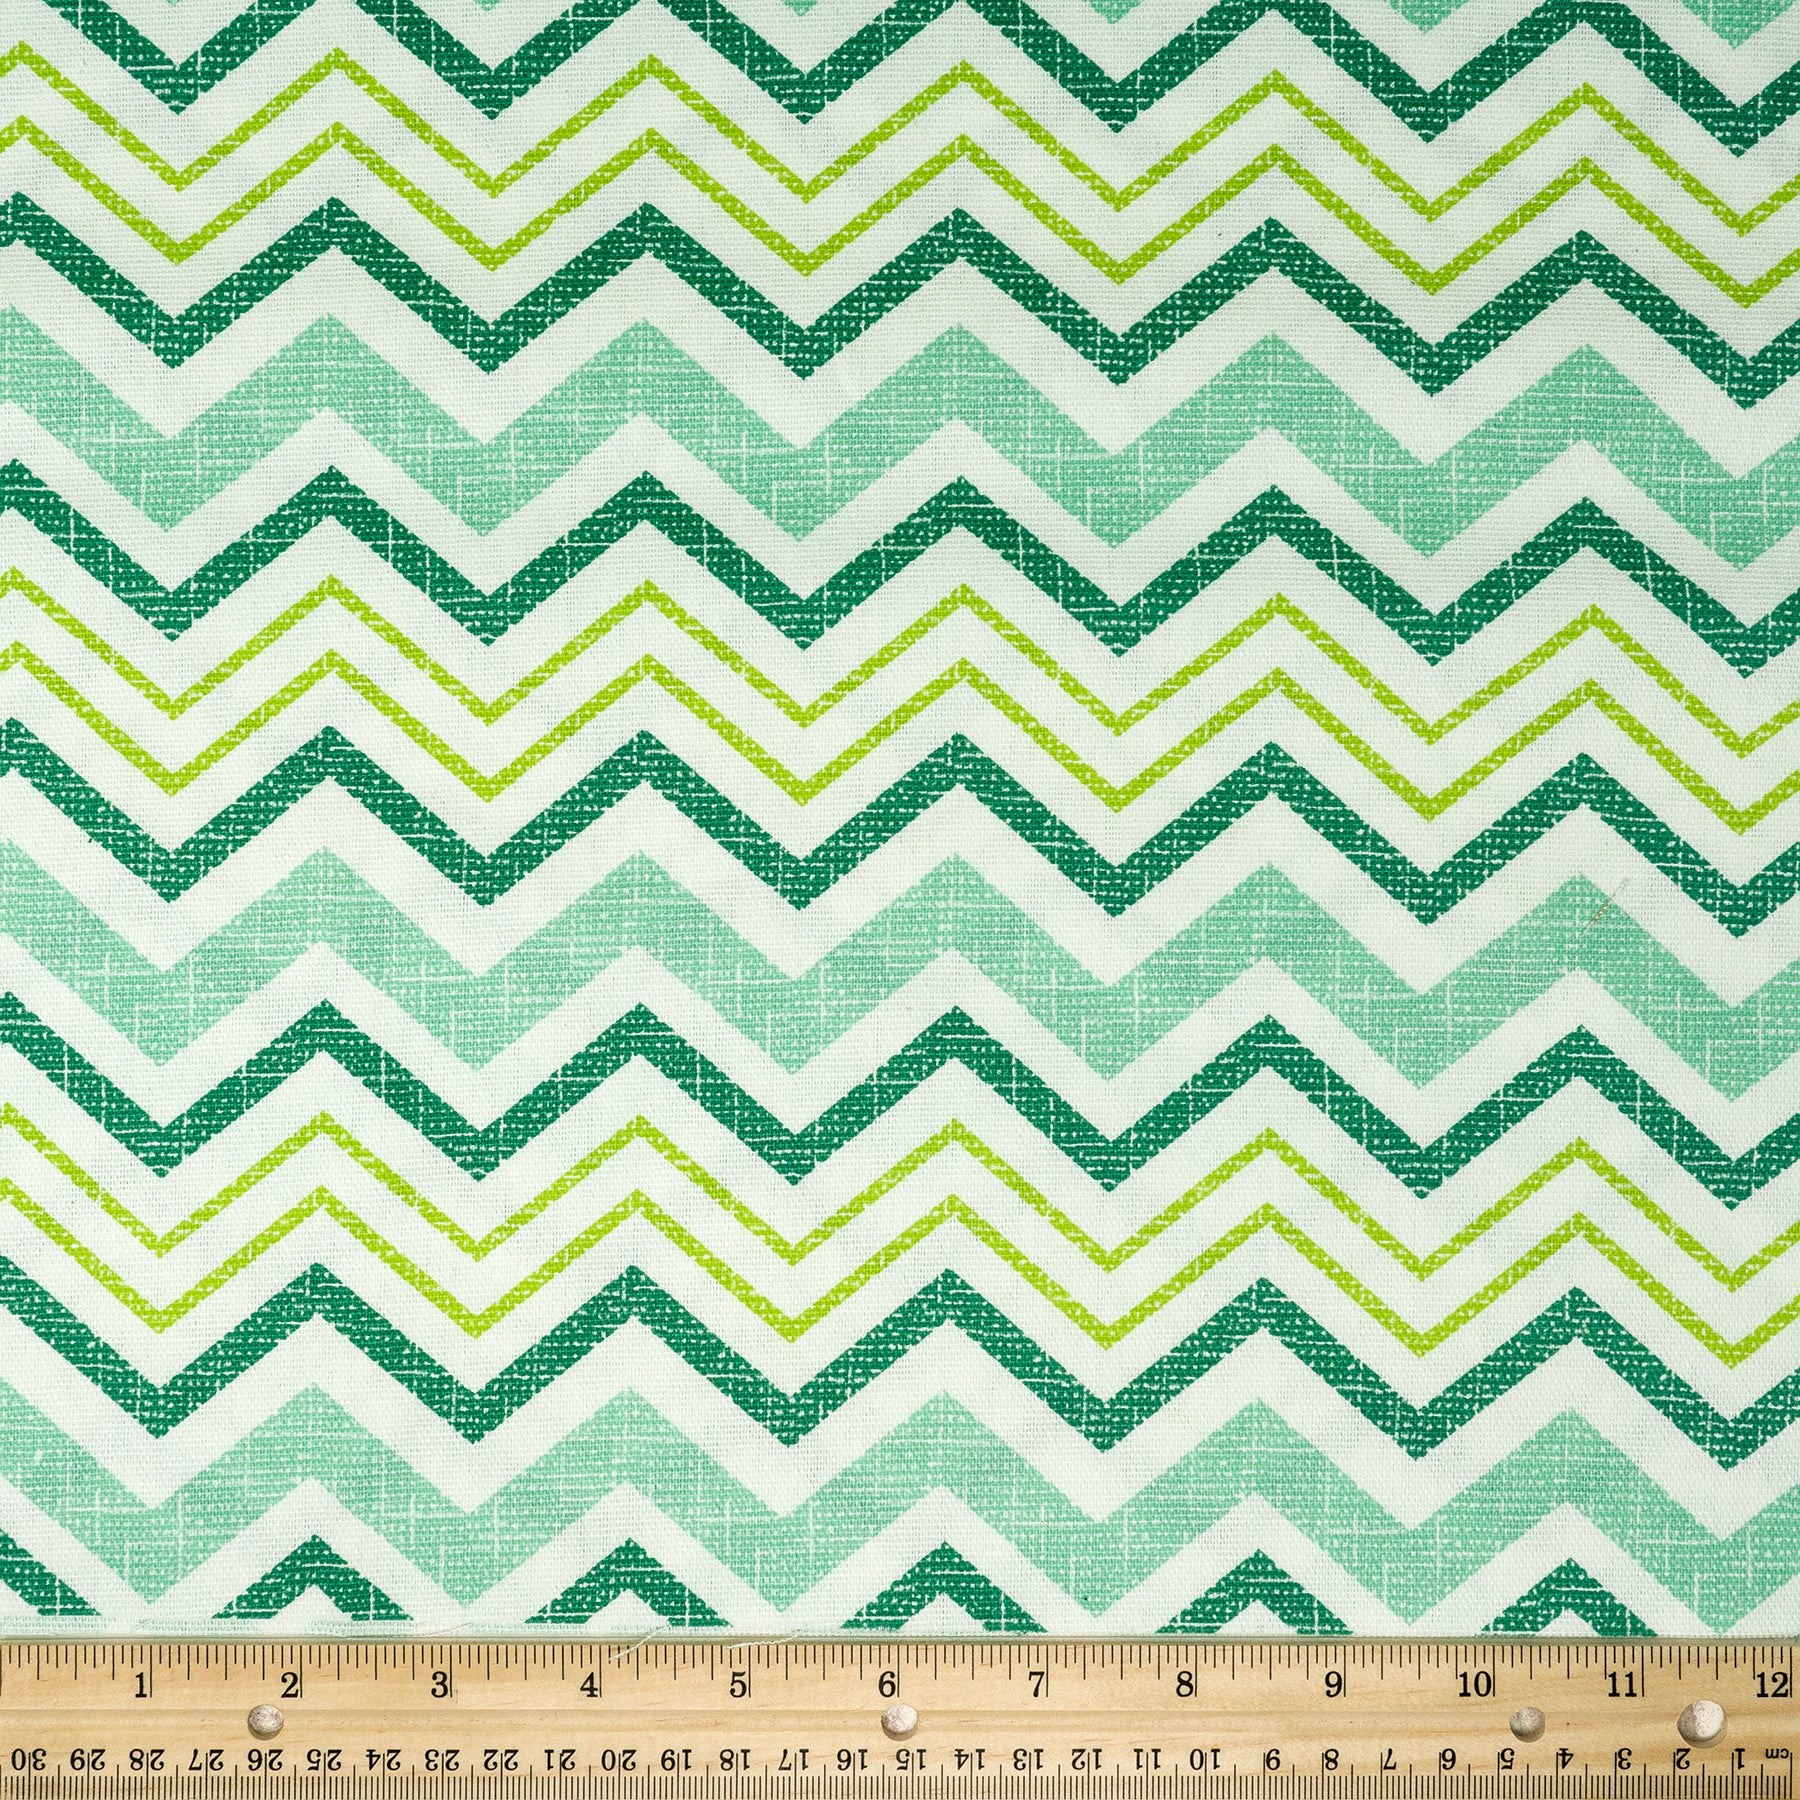 Waverly Inspirations 100% Cotton Duck 45" Width Chevron Lime Print Sewing Fabric by the Yard